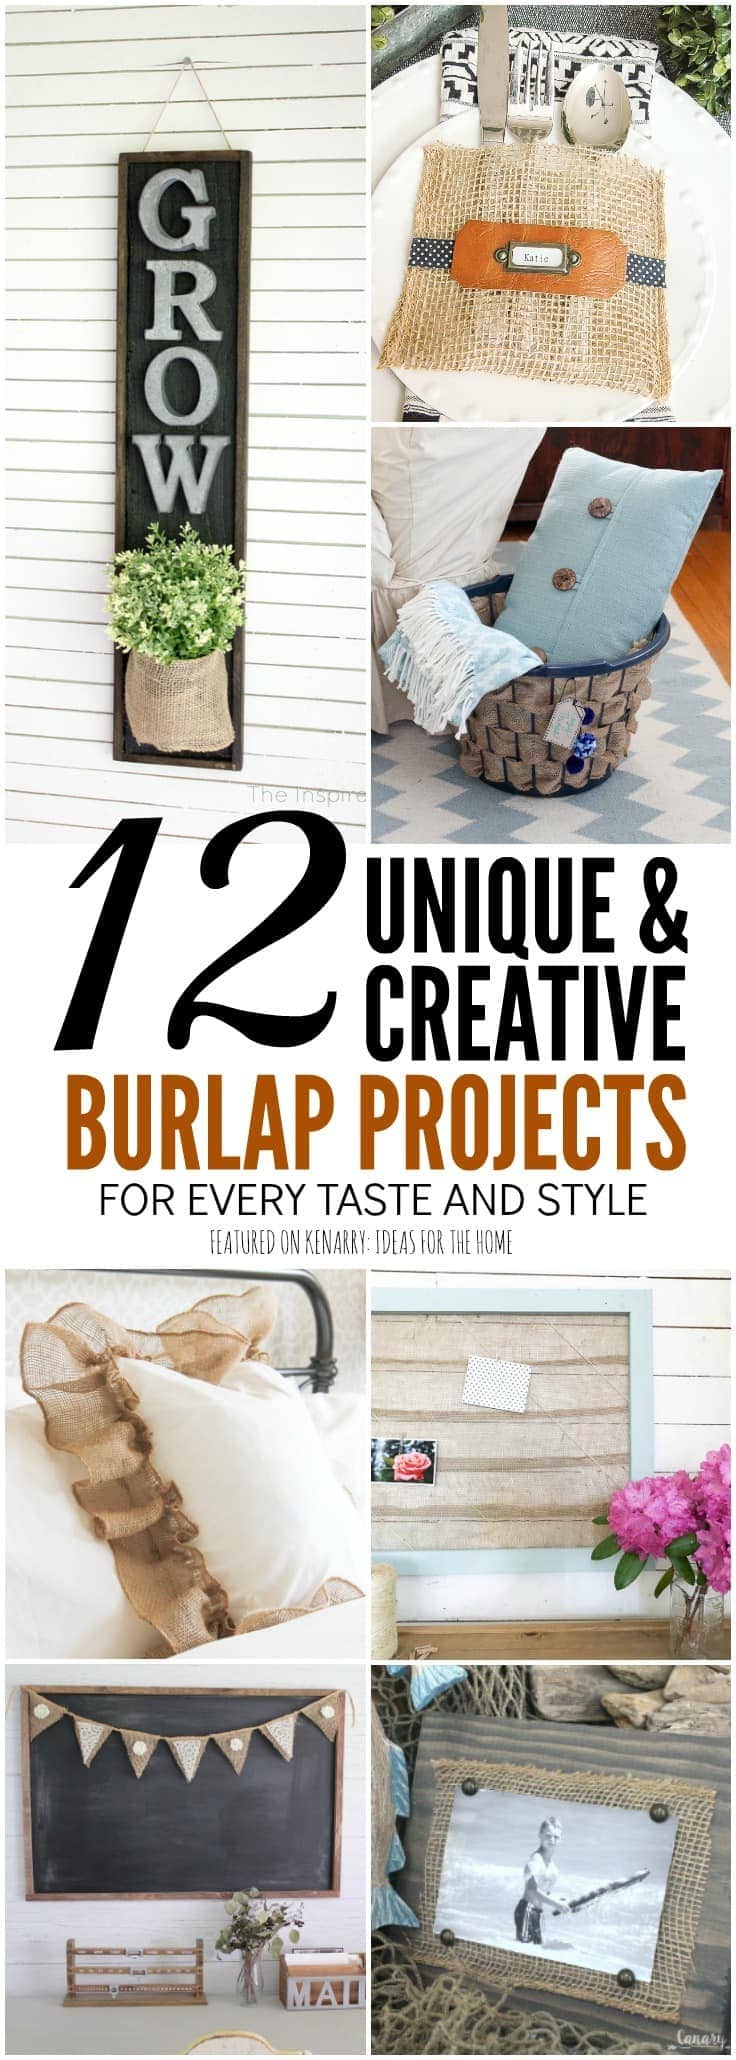 Burlap craft projects are easy to make and can be customized to fit any style or home decor. Rustic farmhouse style | Modern boho style | Classic country style | Burlap ribbon | Burlap ideas | Burlap crafts | Burlap decor